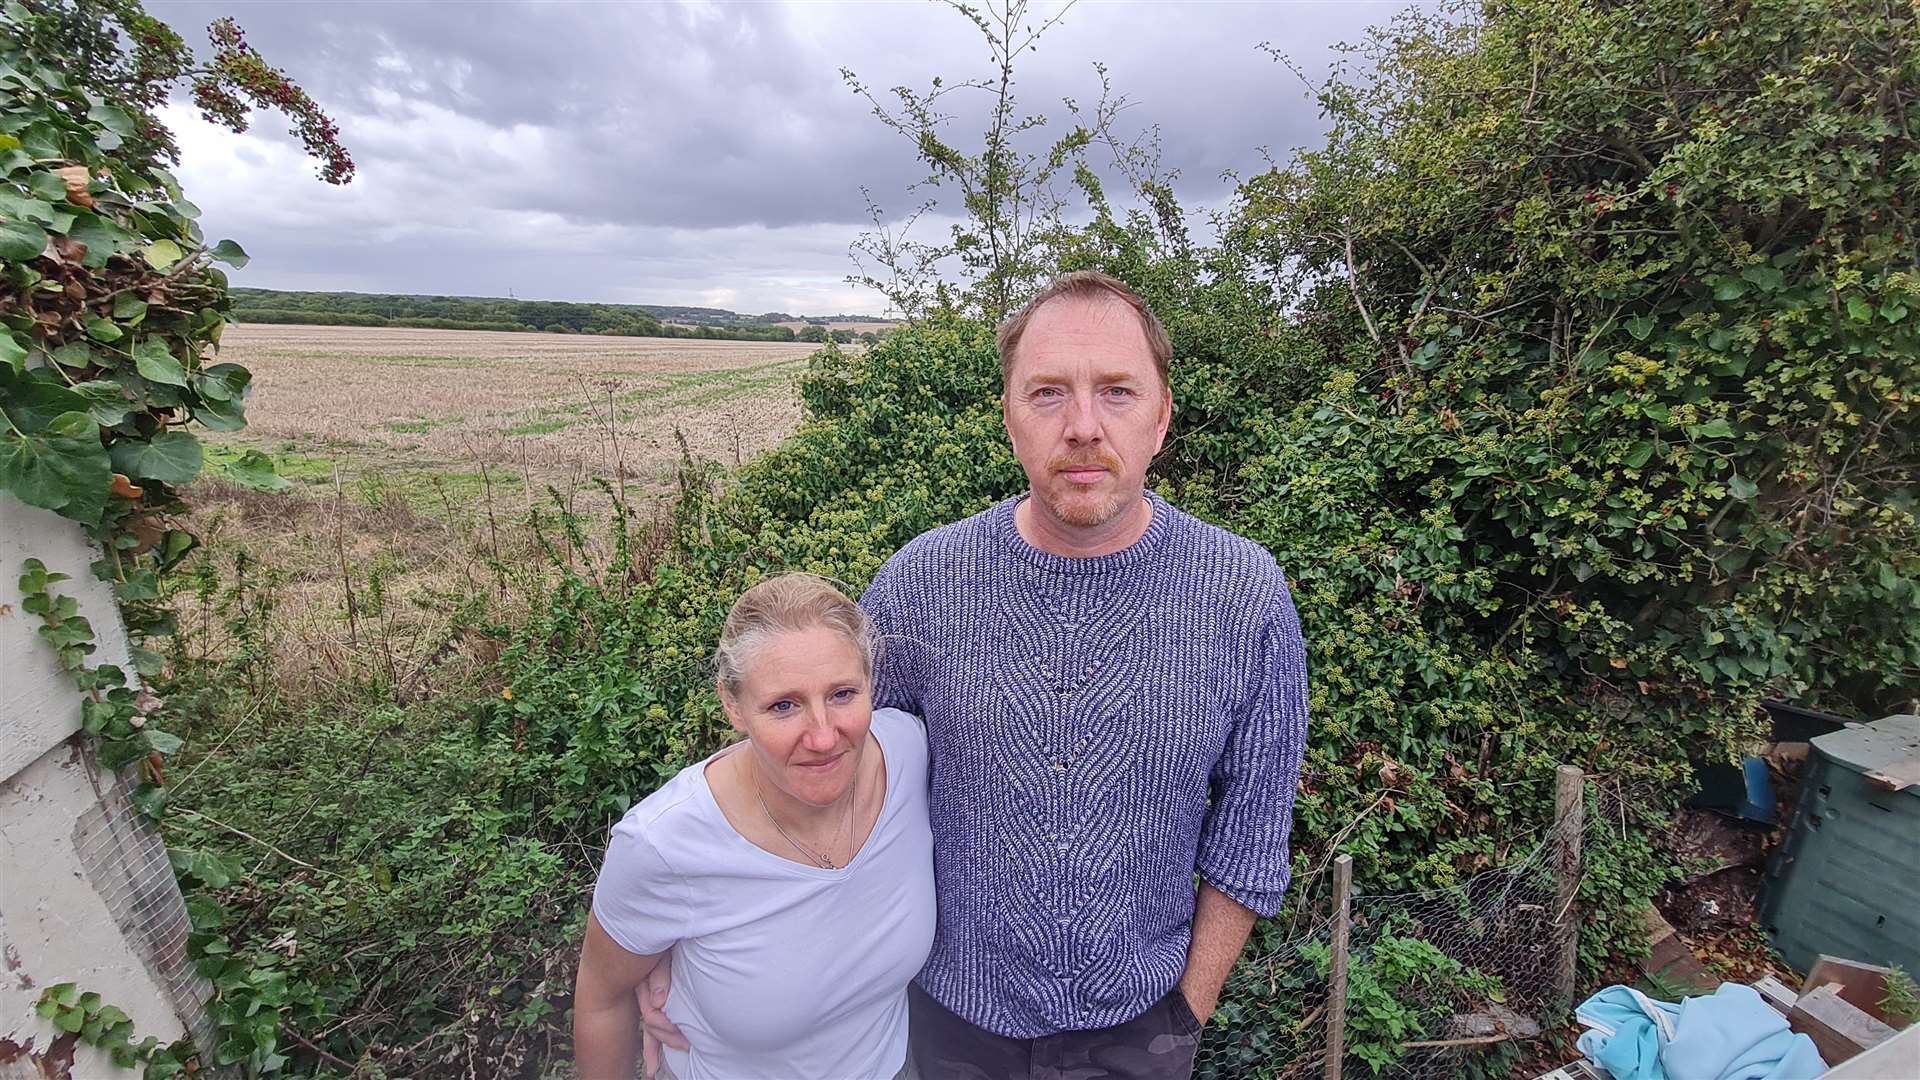 Philip and Marjorie Sumnall, residents of Hersden, near Canterbury